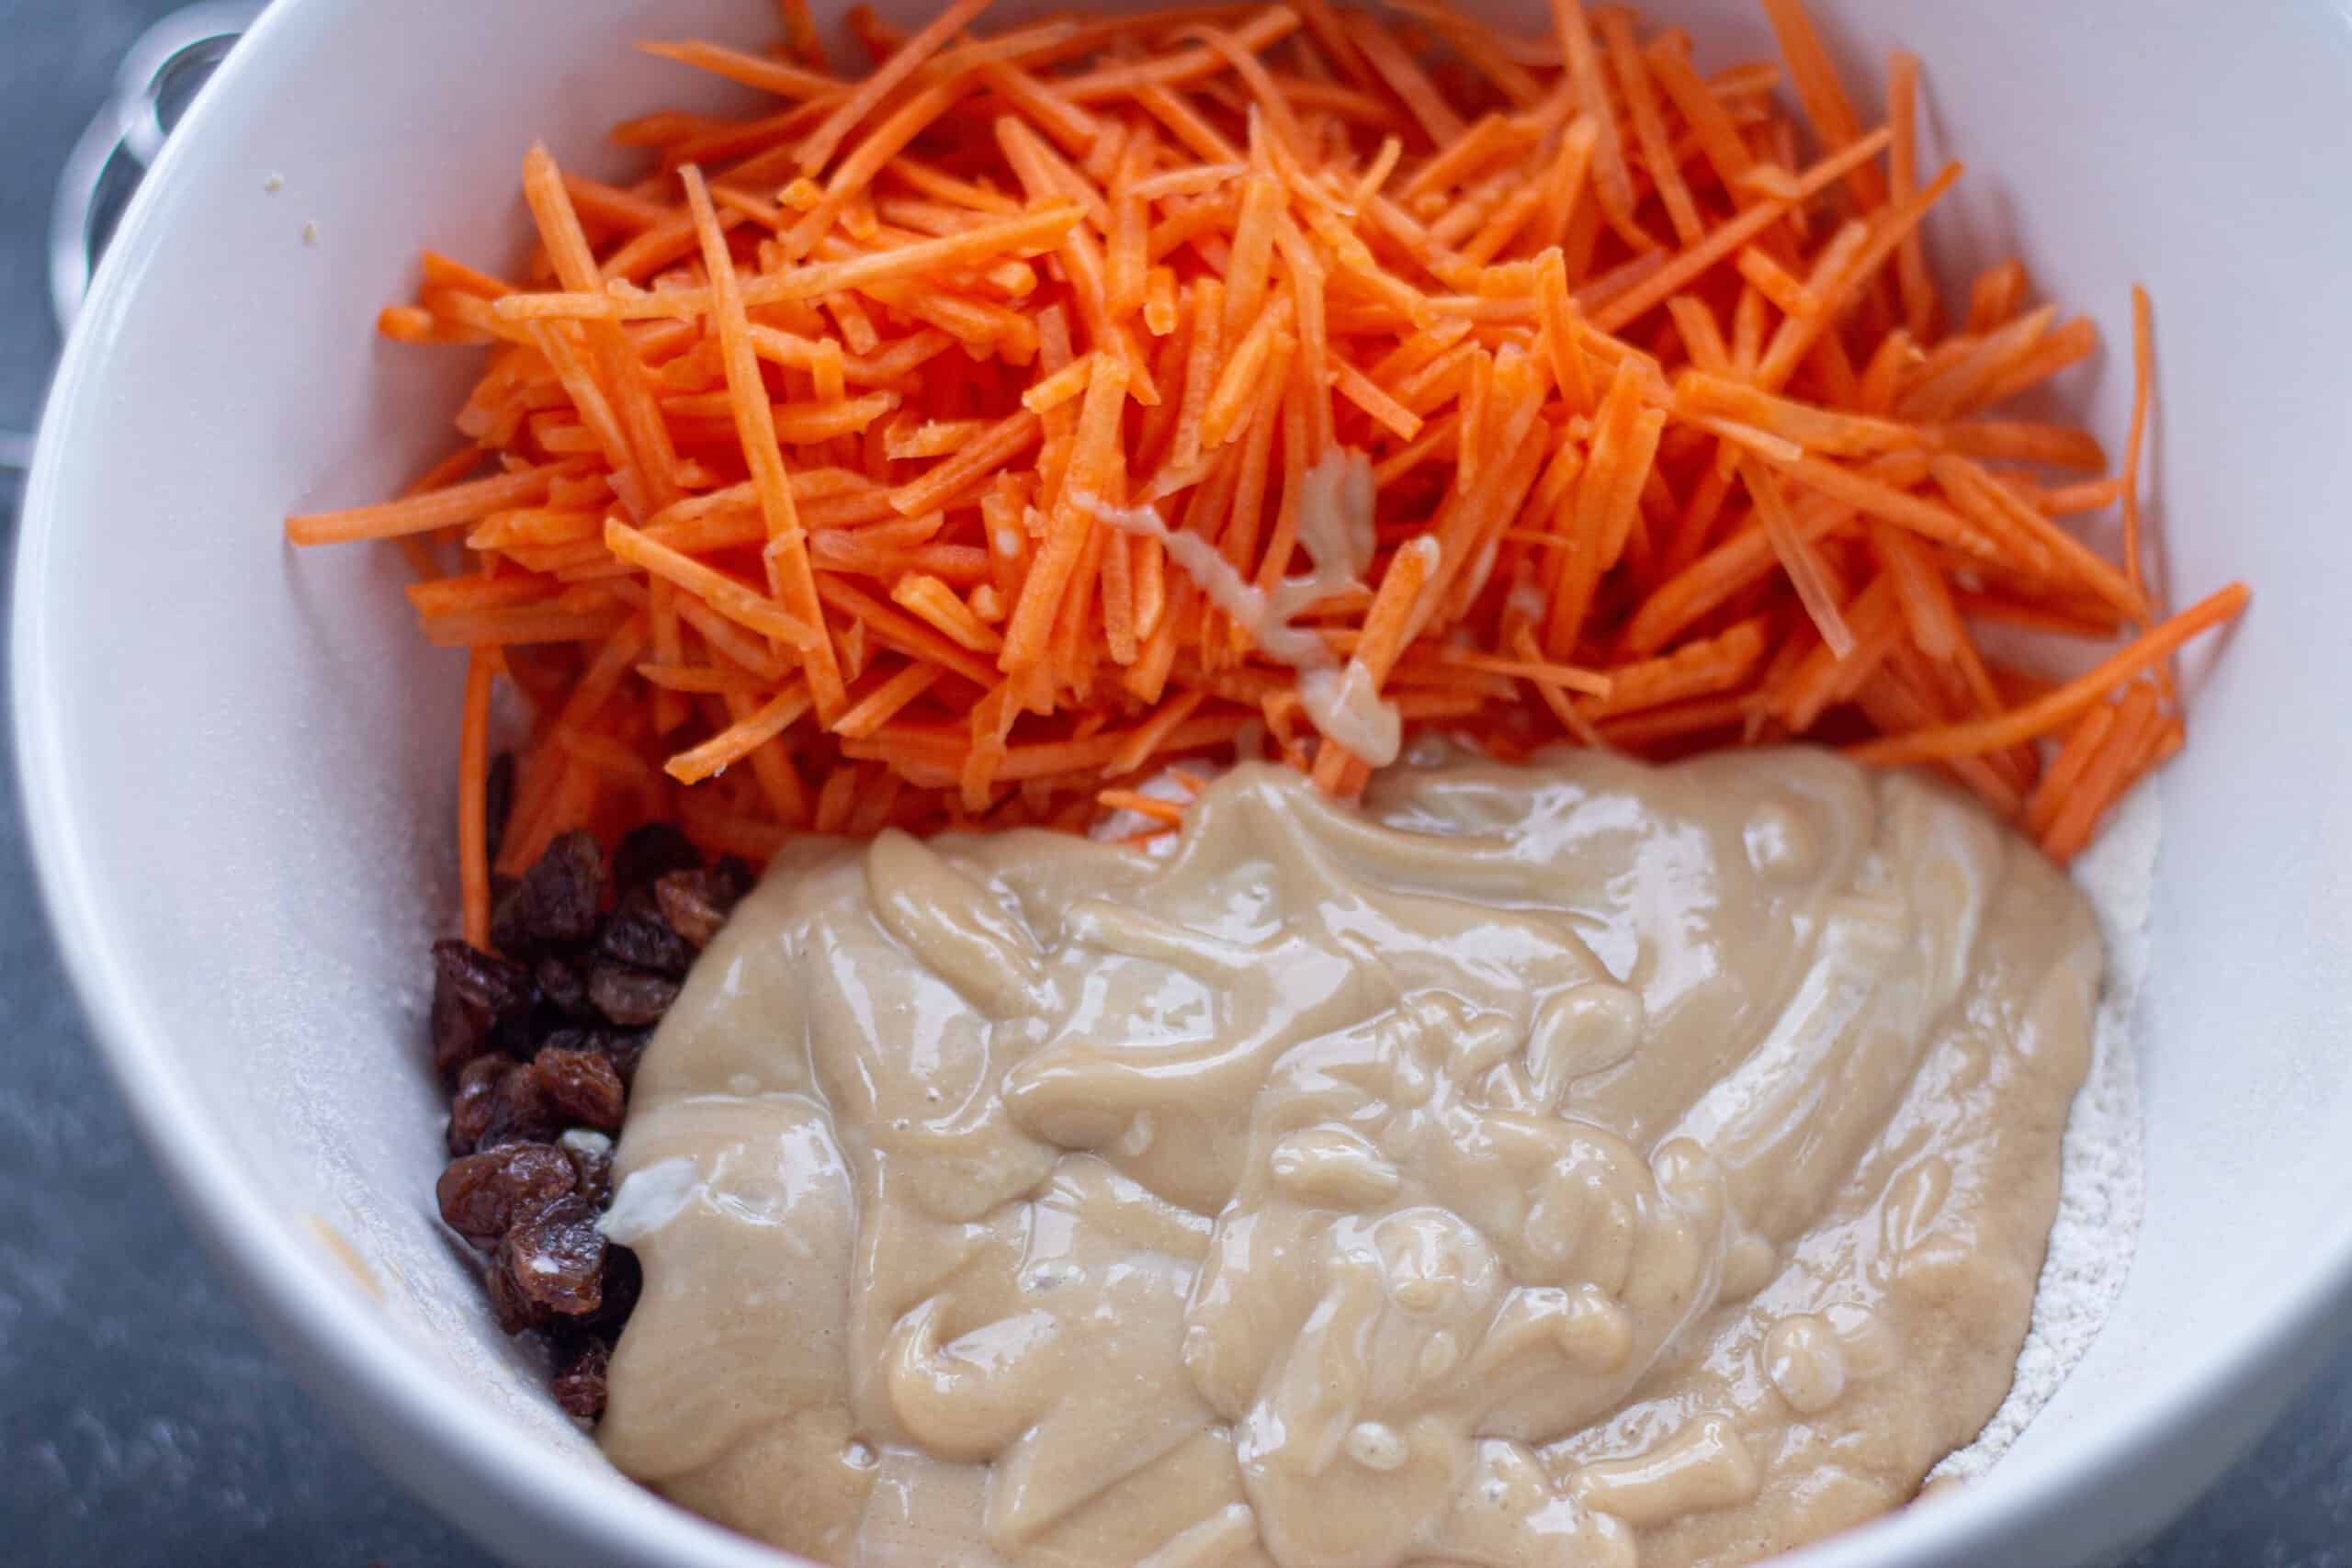 Mixing all the ingredients together for carrot cake